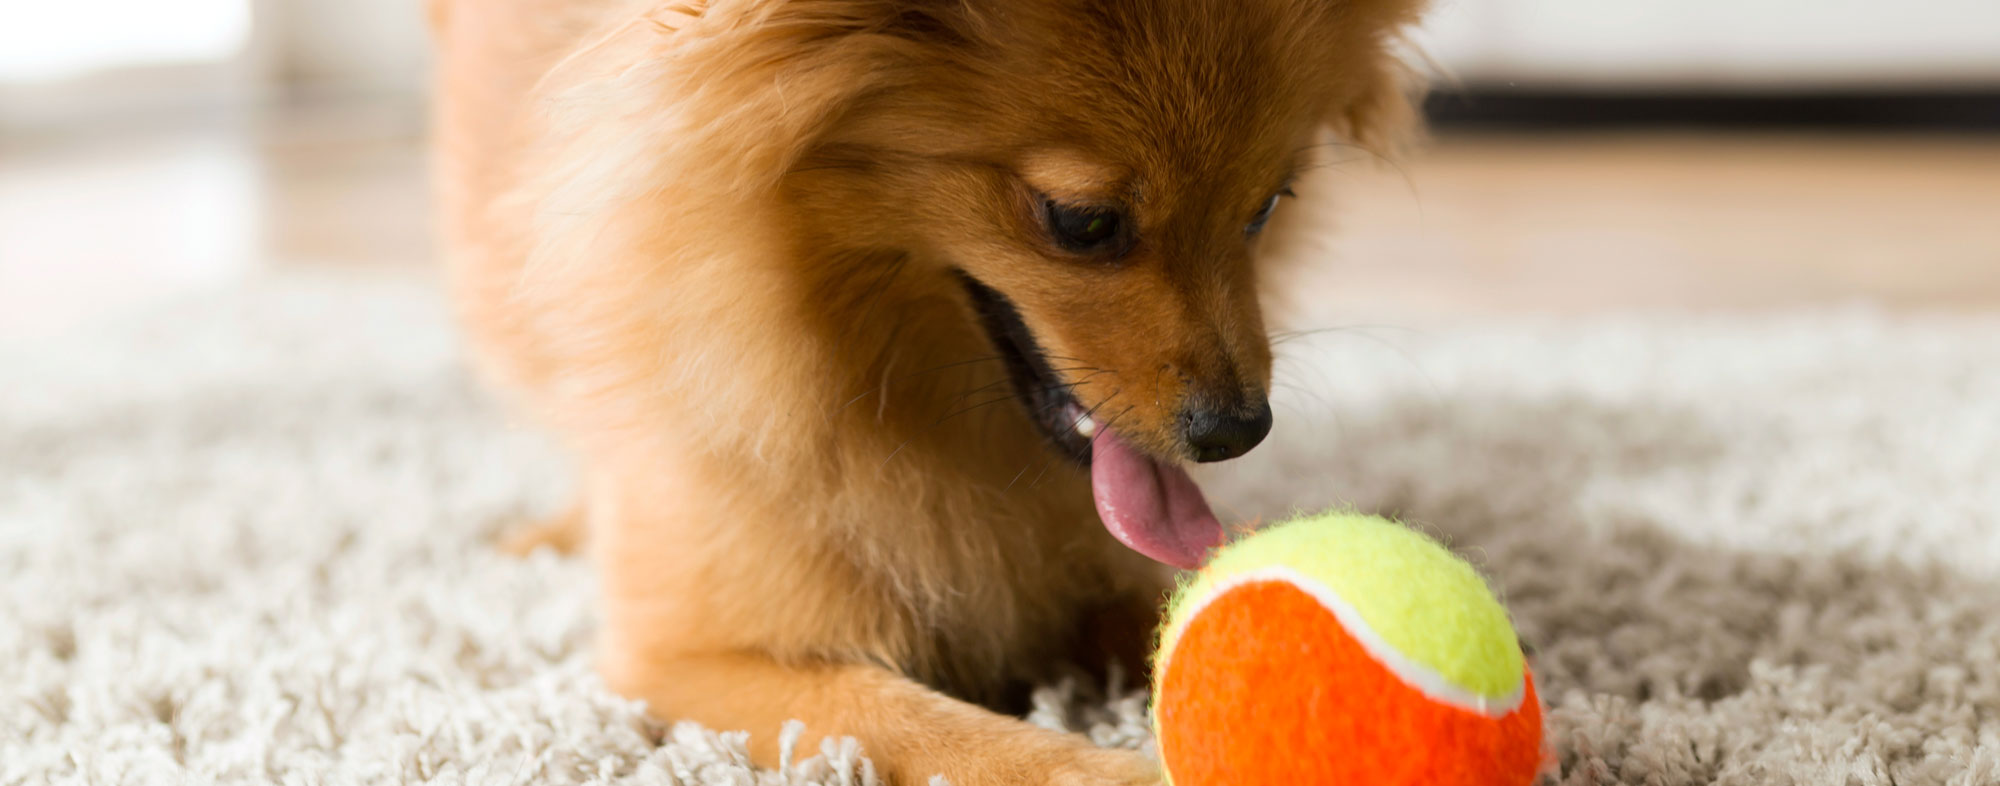 With a velcro ball, you and your dog can play games indoors